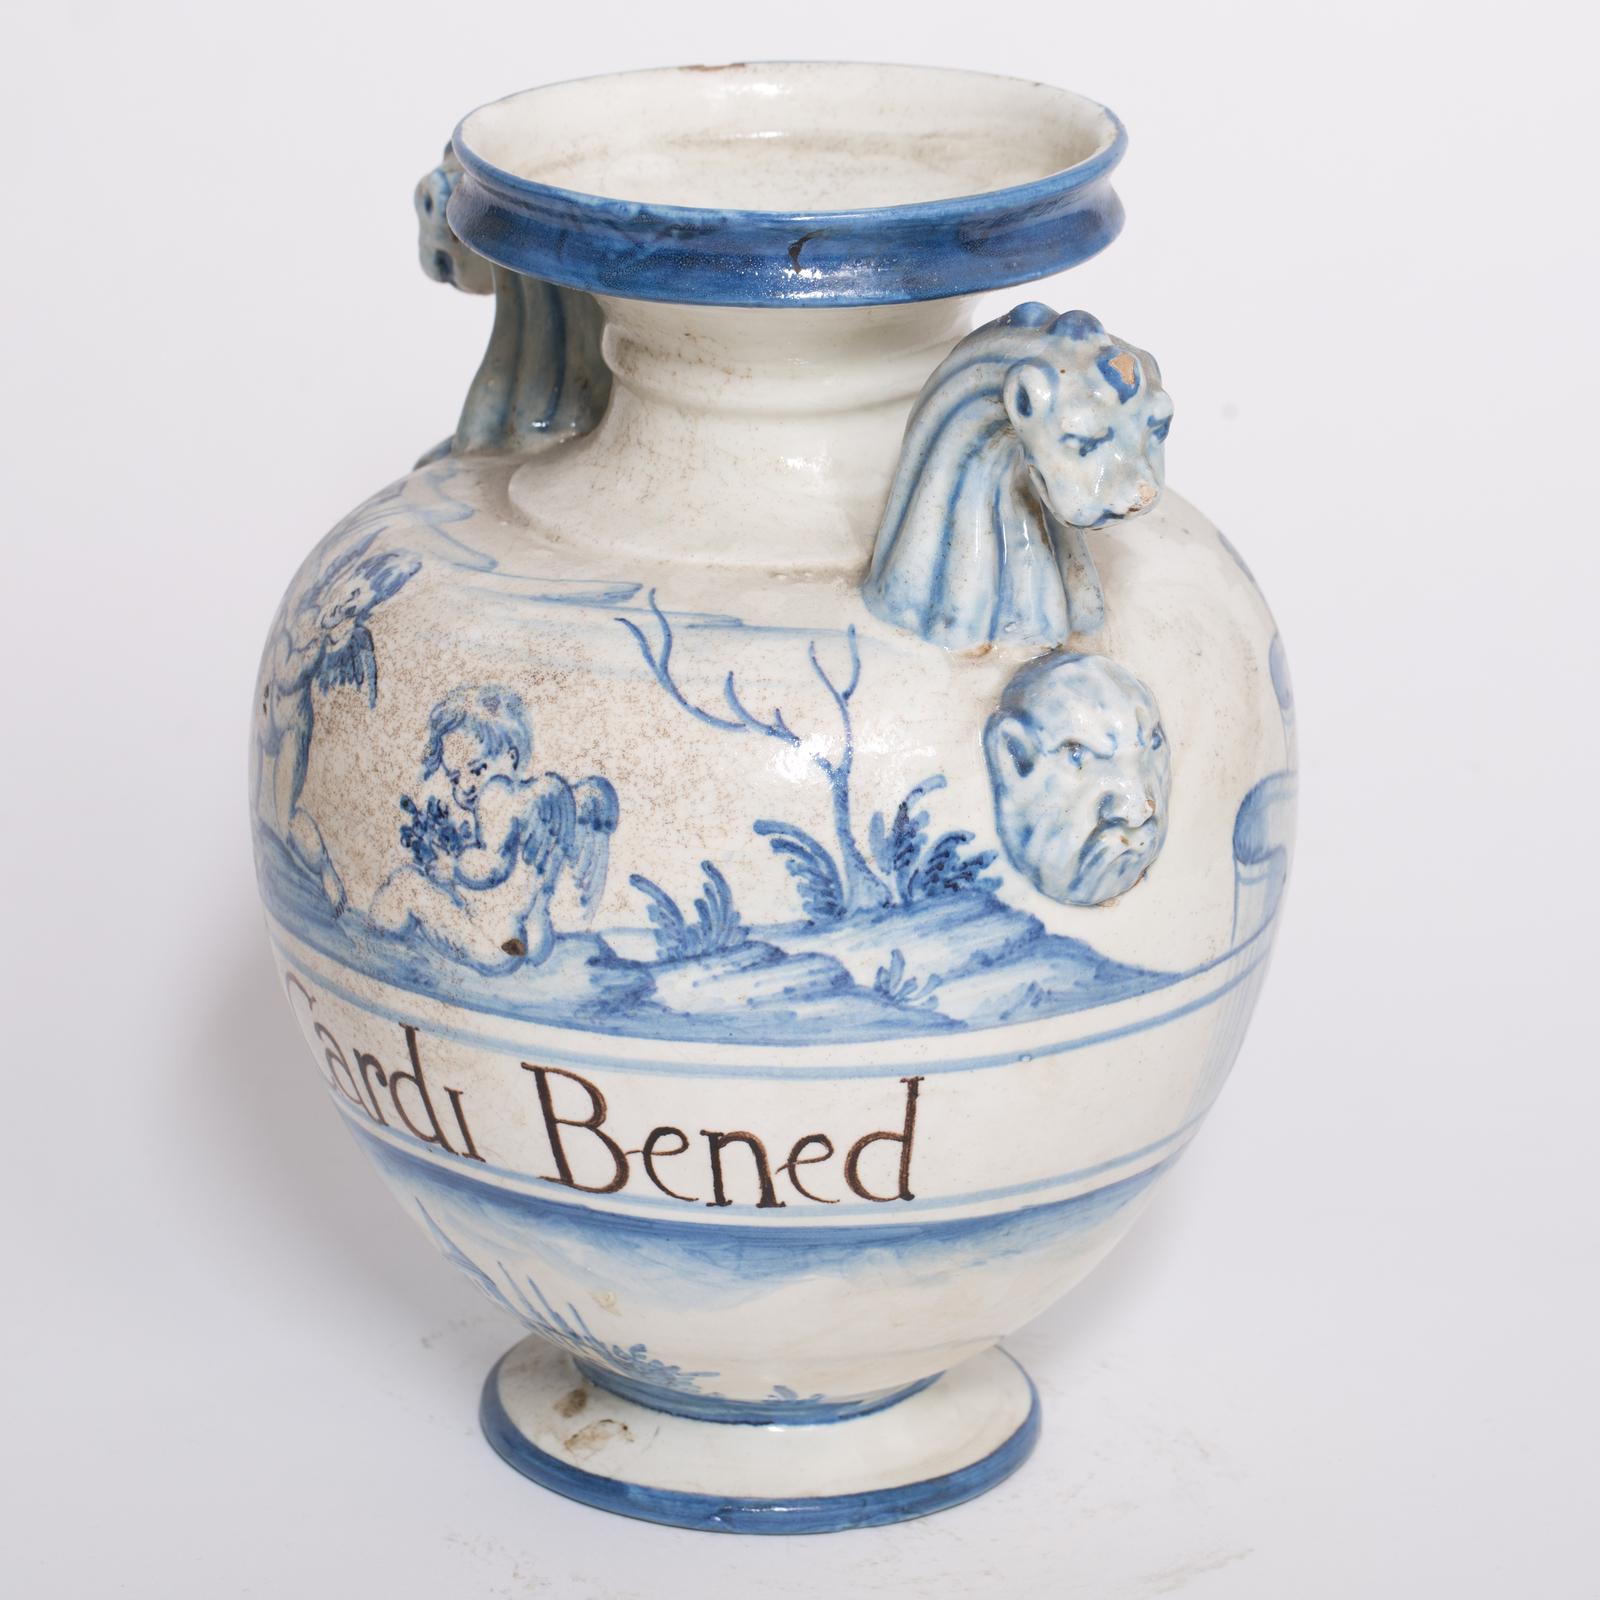 This vase is a reproduction of an antique apothecary jar, masterfully reproduced by the expert maiolica artisans of Manetti e Masini in Florence. Executed in blue and white Ligurian style, the maiolica piece features the writing of the content 